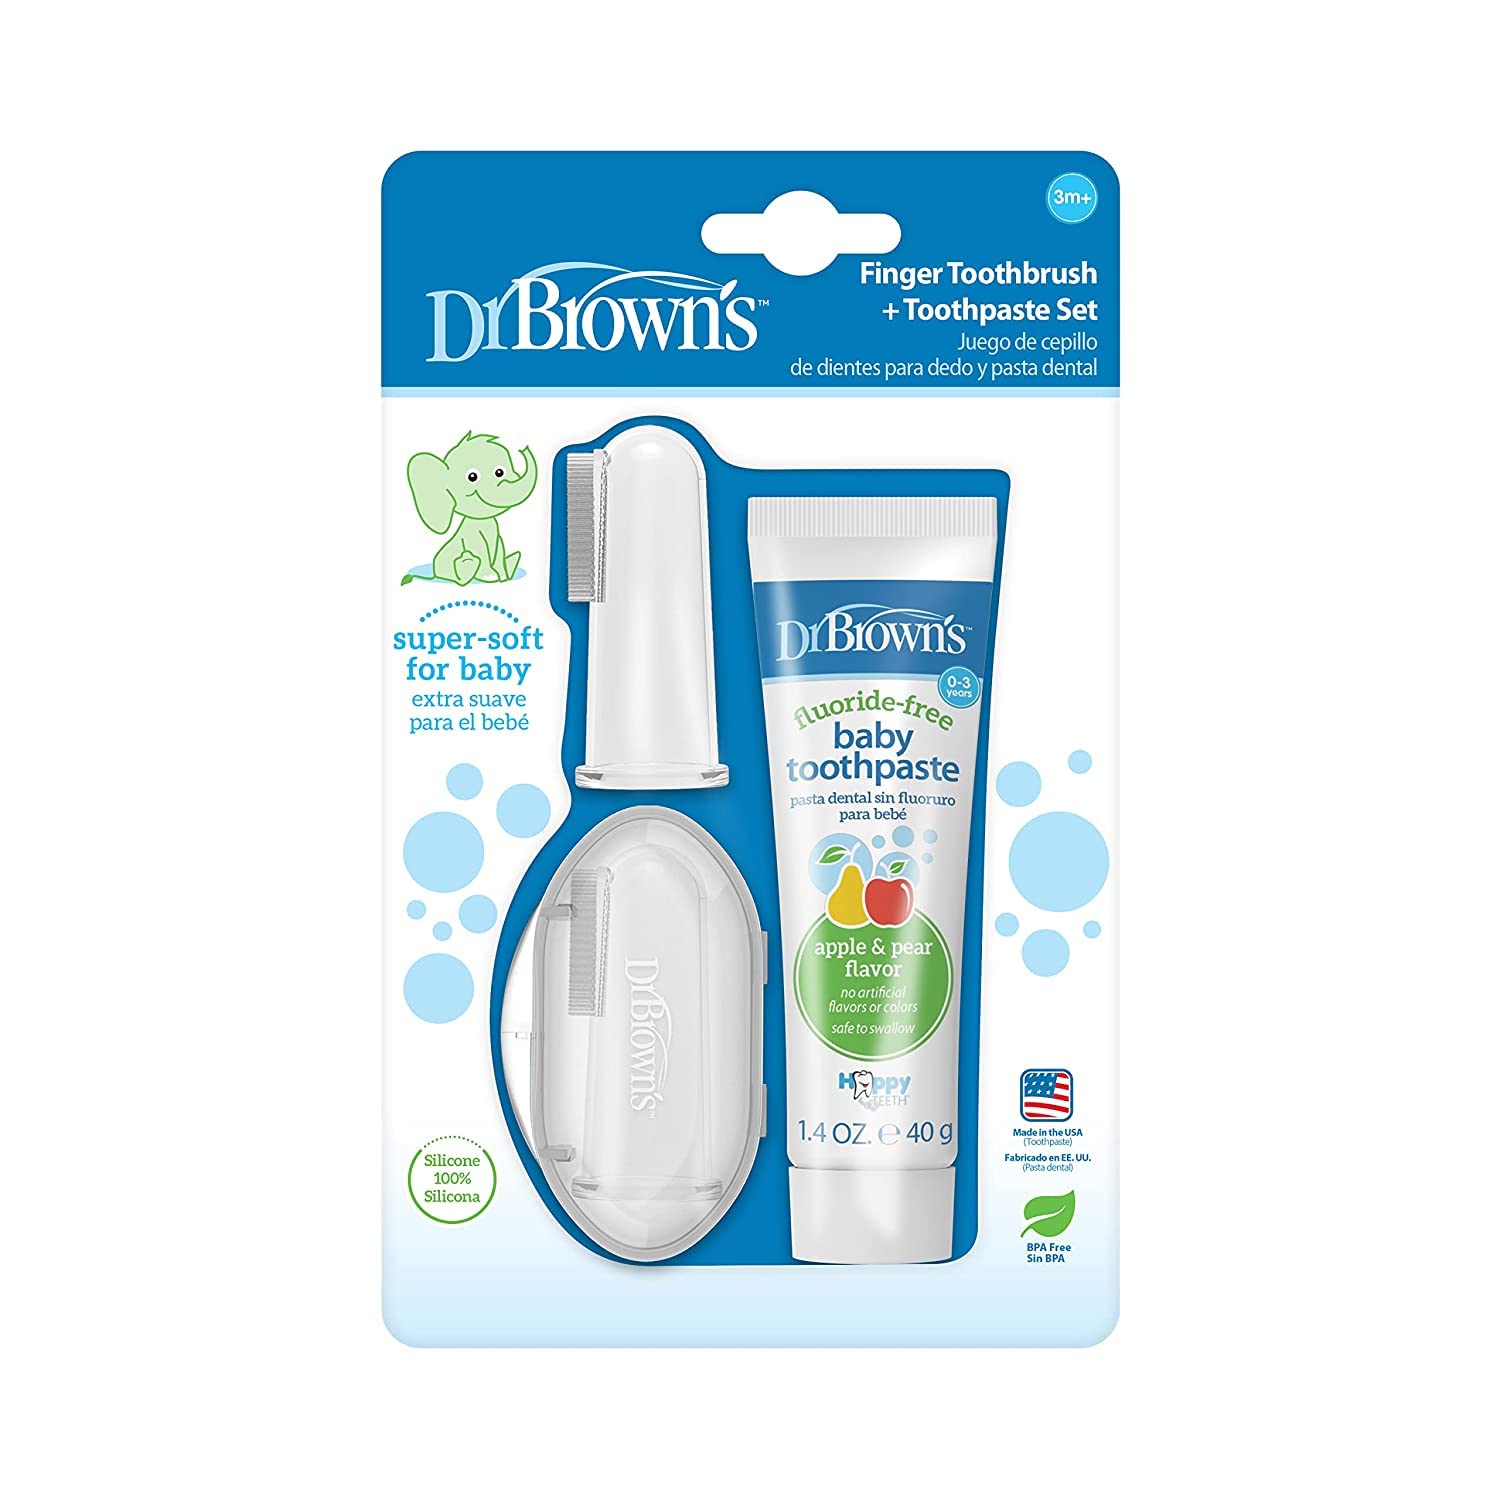 Dr. Brown’s 100% Silicone Baby Finger Toothbrush and Toothpaste Set, 2-Pack Toothbrush with Storage Case, Fluoride-Free Apple Pear Toddler Toothpaste